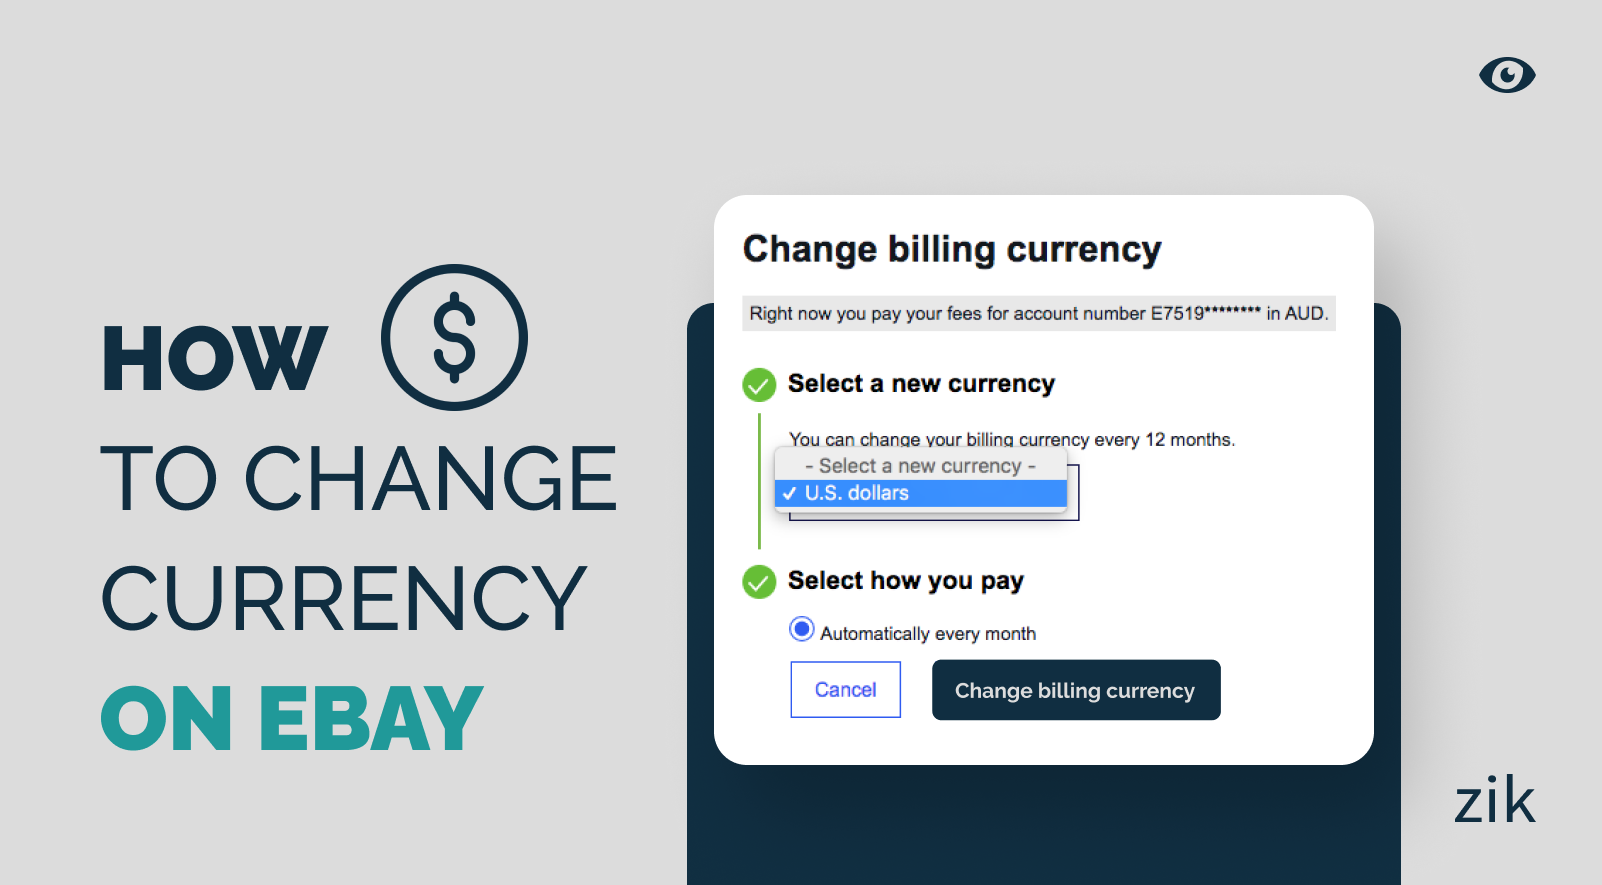 How to change your currency on eBay